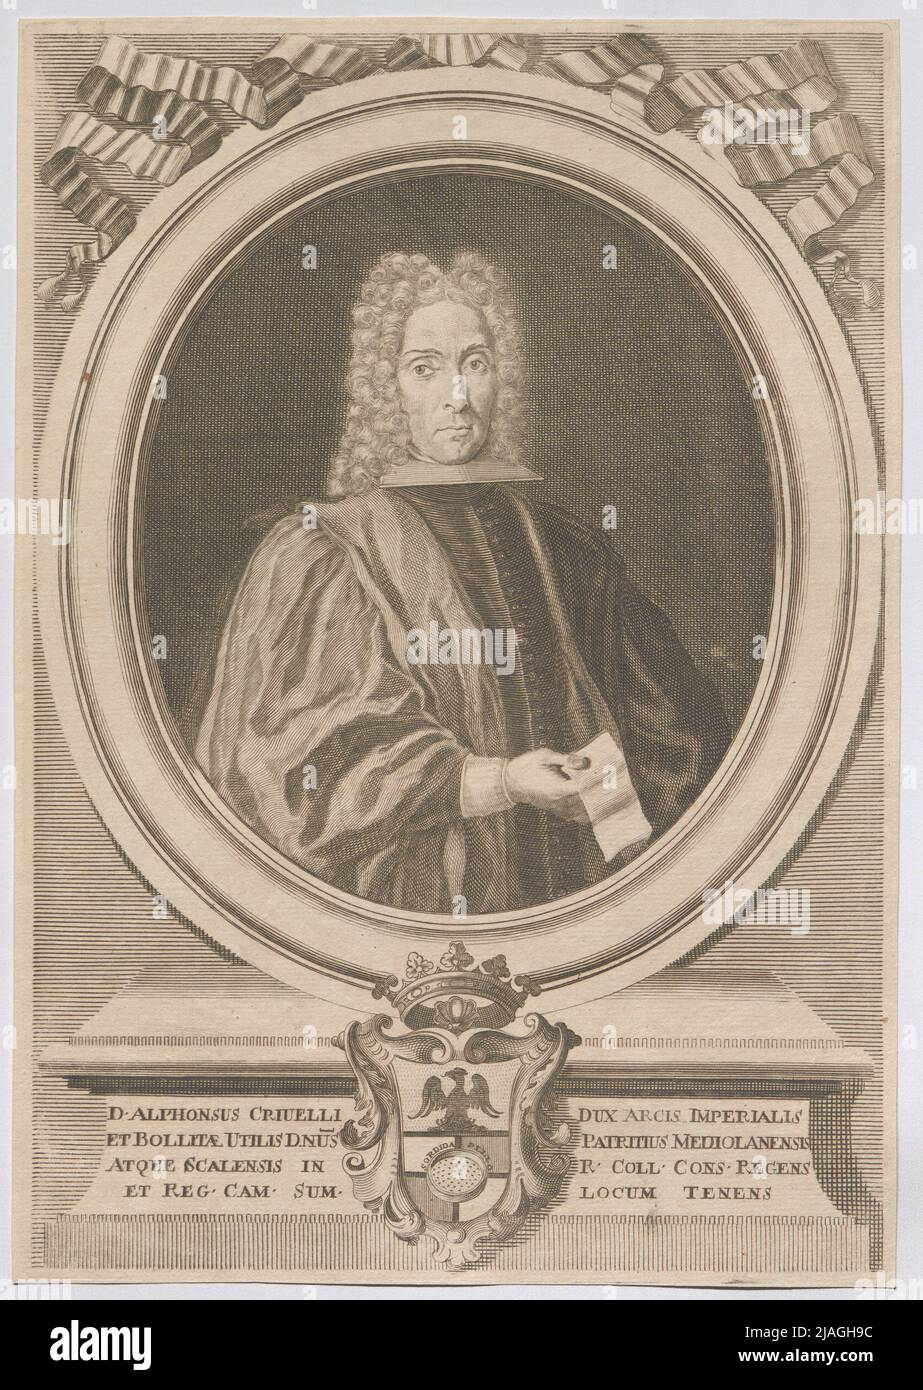 D'Alphonsus Criuelli Leader Captain Imperial and Bollitae useful Dnus Patrich Milan and Scalply in R. coli. Cons. Regent and Reg. (...) '. Herzog D'Alphonsus Civelli, Mailänder Patrizier. Unknown Stock Photo